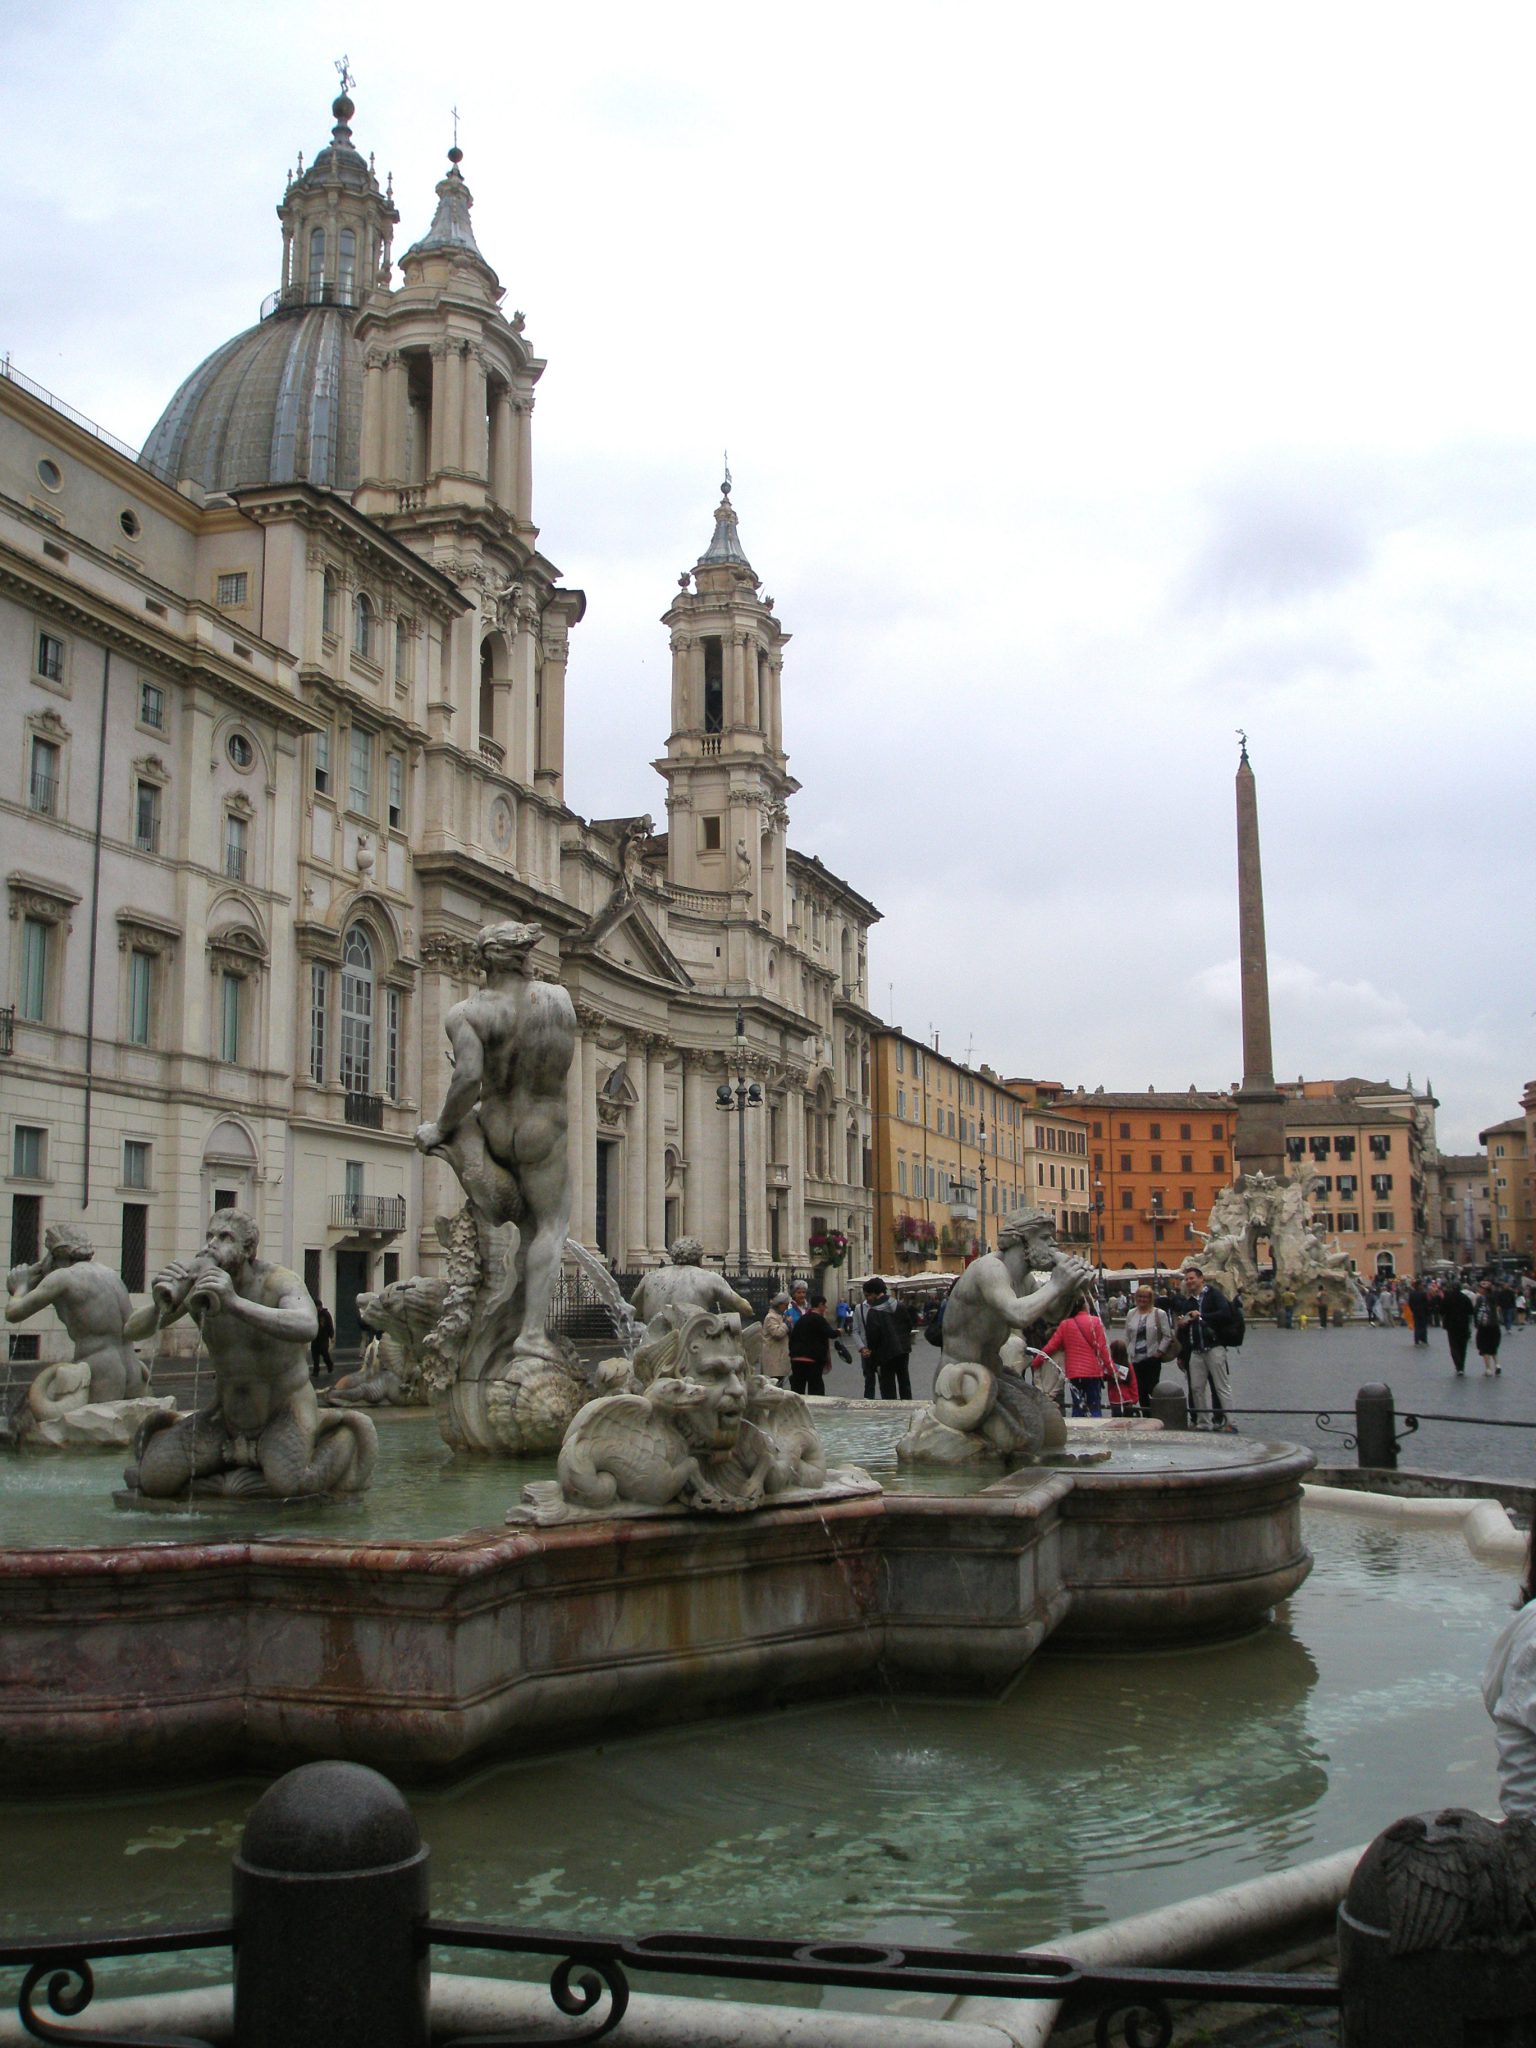 The Fontana del Moro, with its 4 Tritons, was made in 1576 by Giacomo della Porta. Bernini gussied things up in 1653, when he added the central figure, who rides a dolphin.